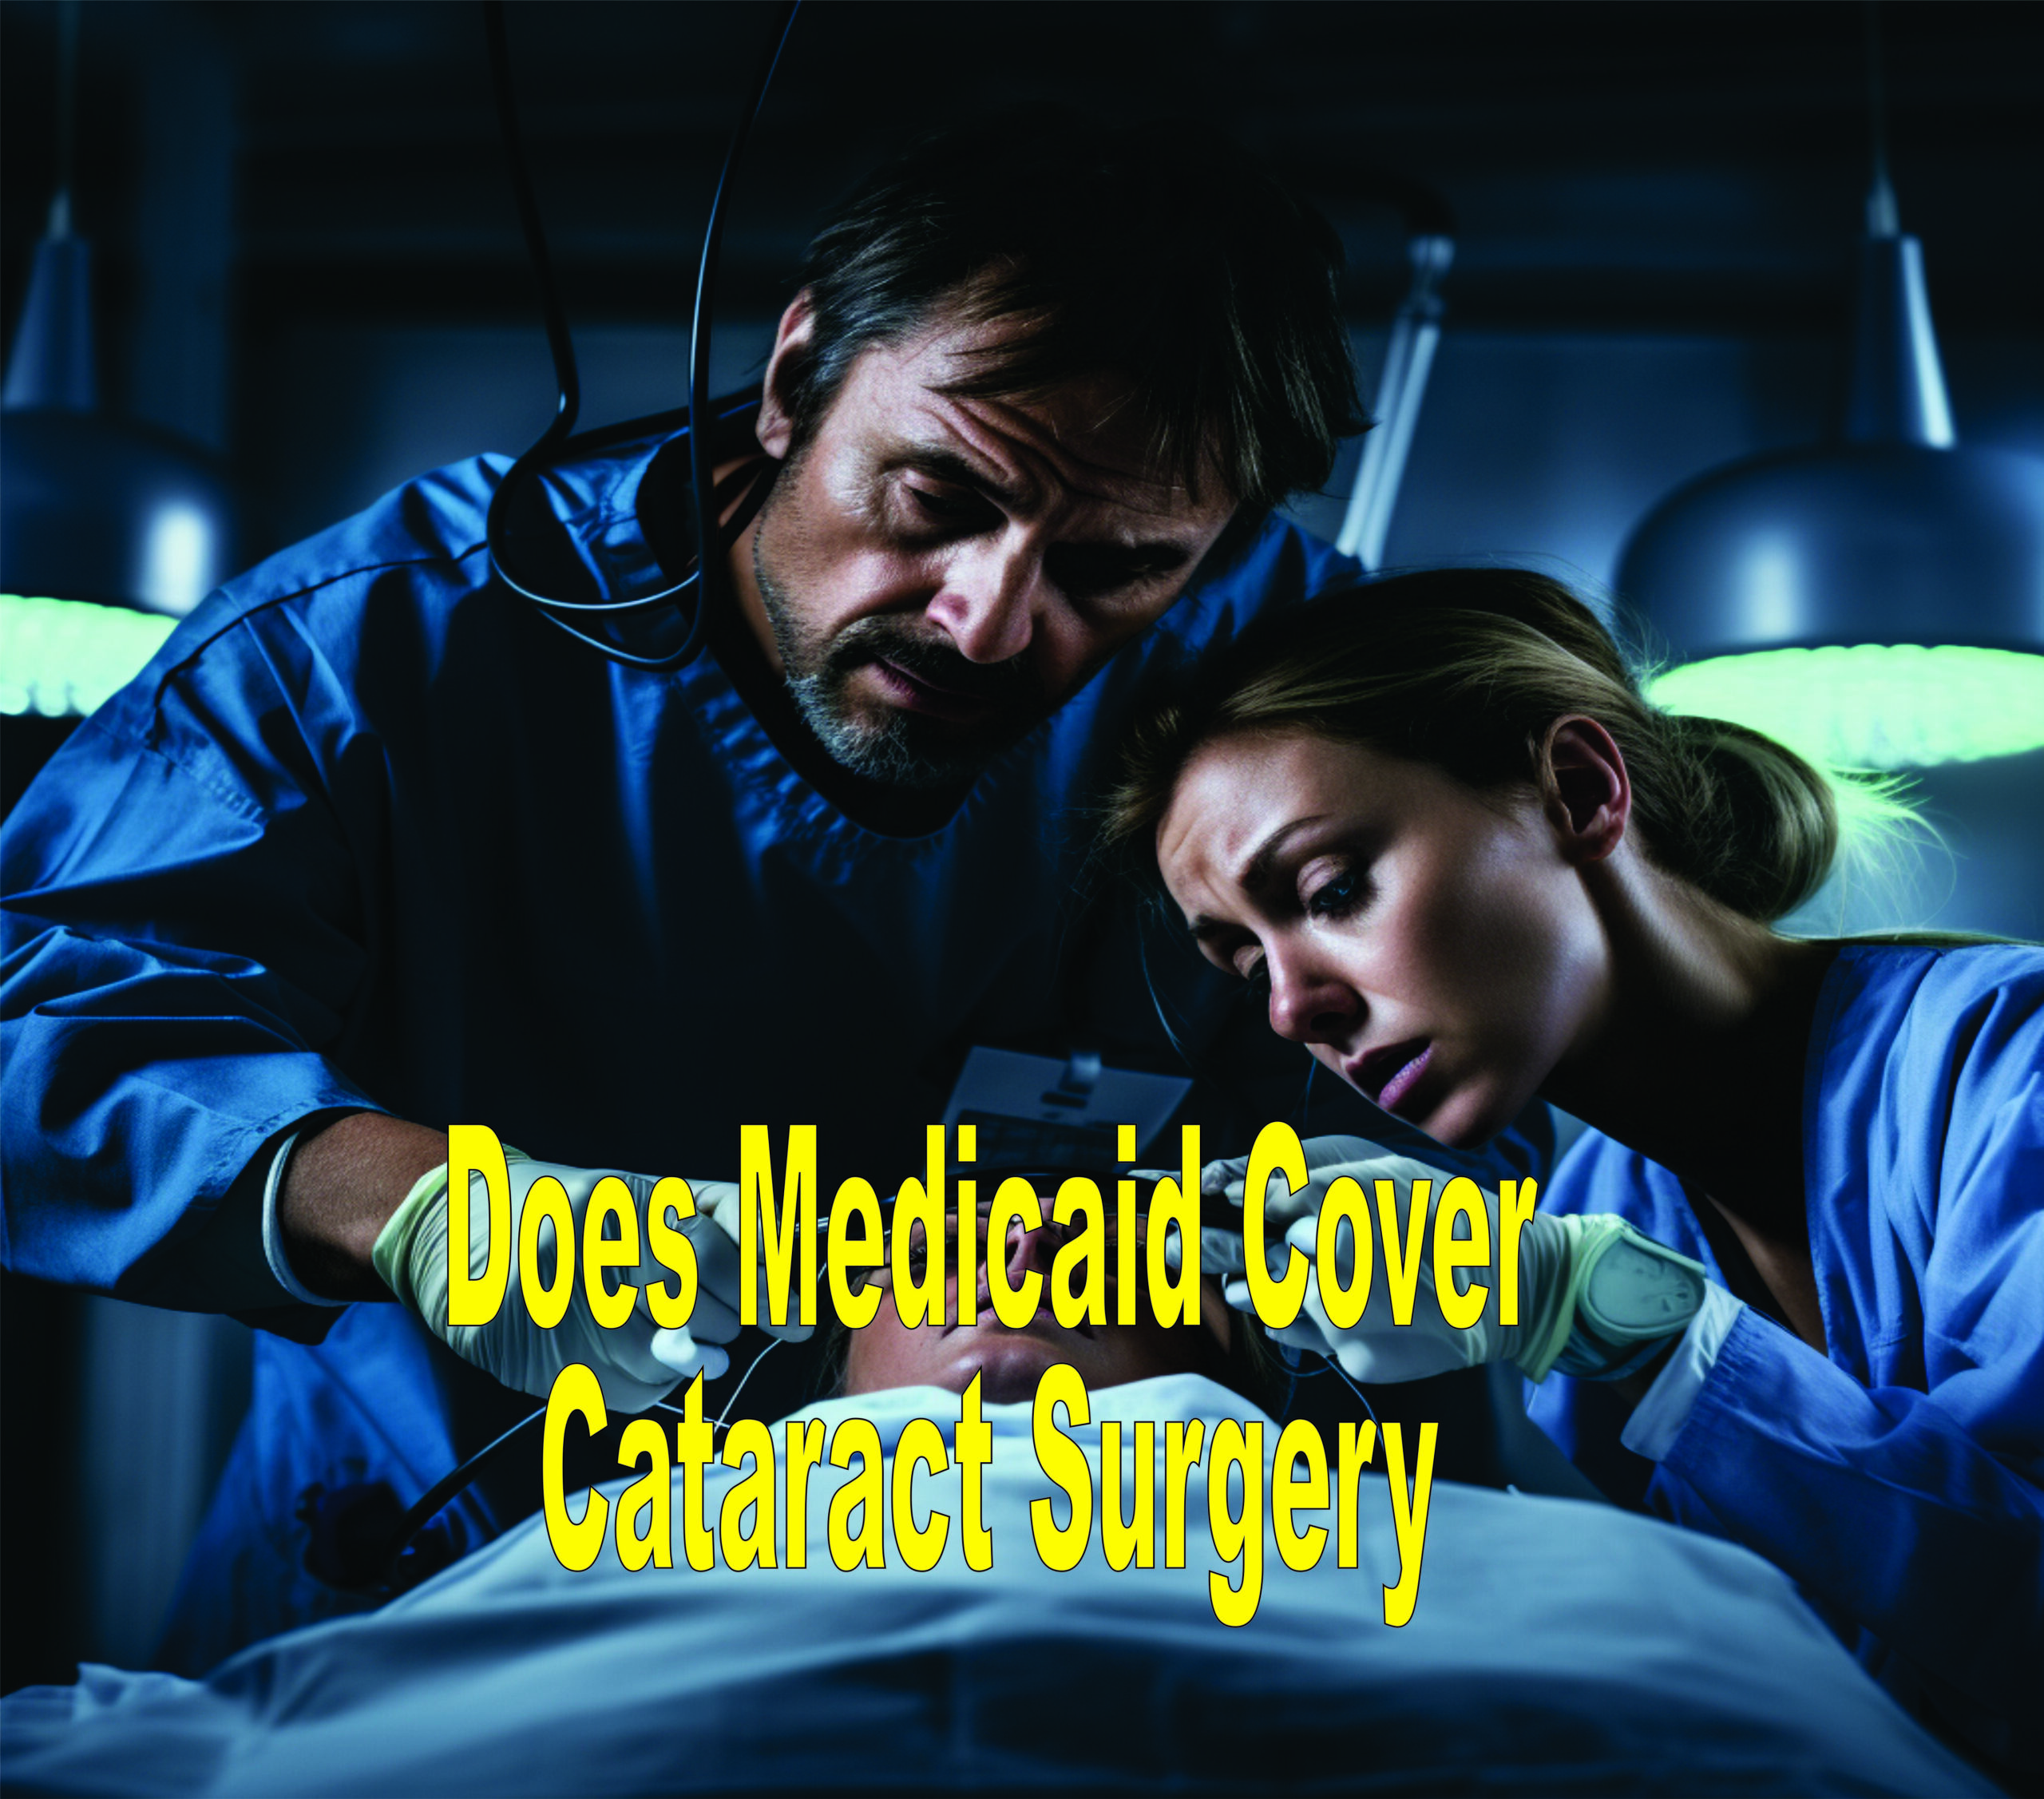 Does Medicaid Cover Cataract Surgery